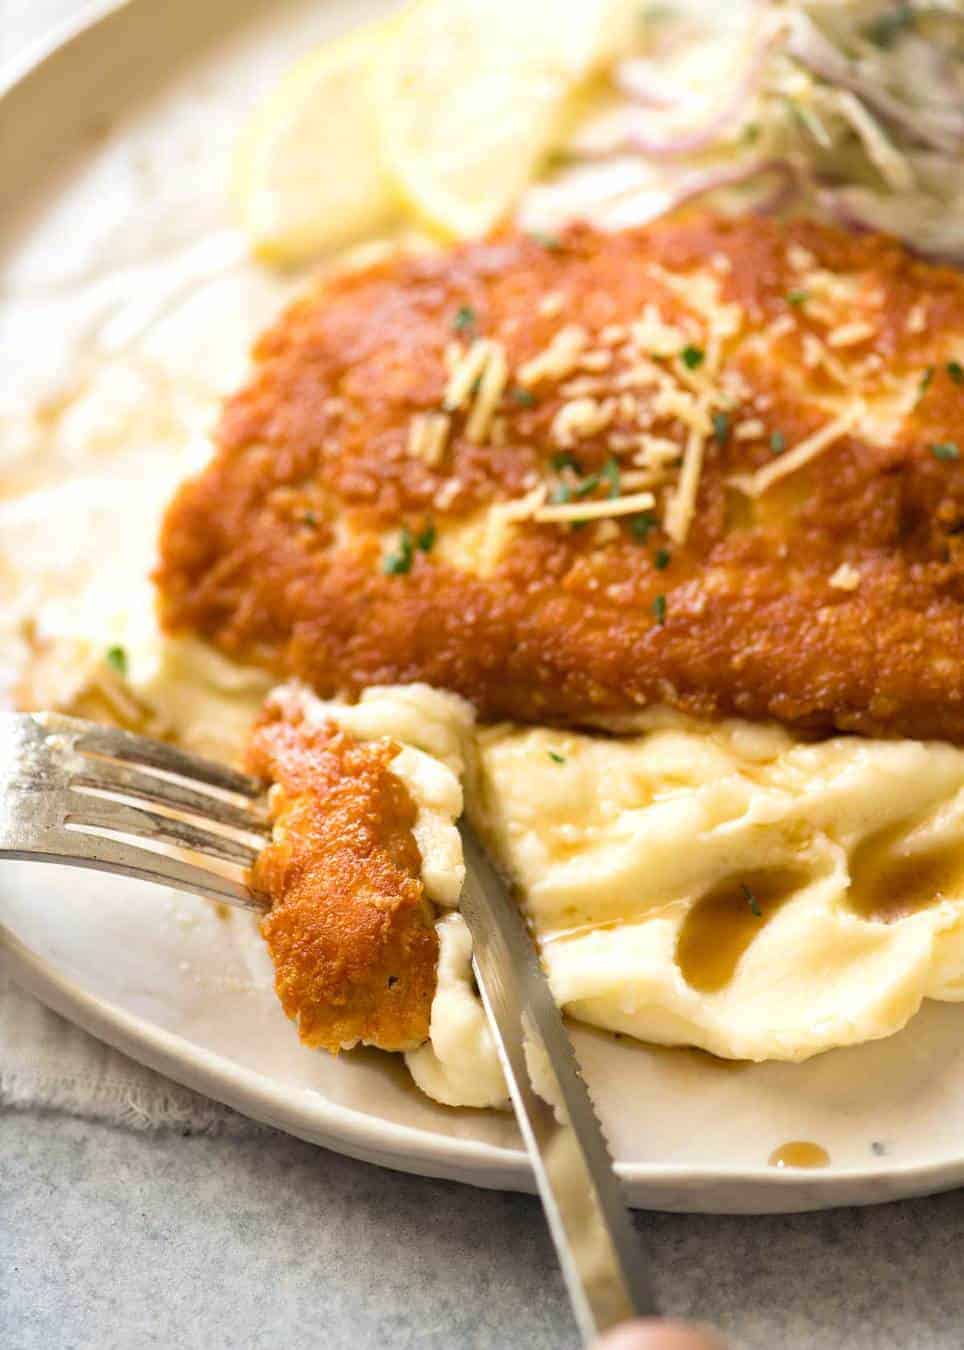 Parmesan Crusted Chicken Breast - golden brown and crispy on the outside, juicy on the inside.